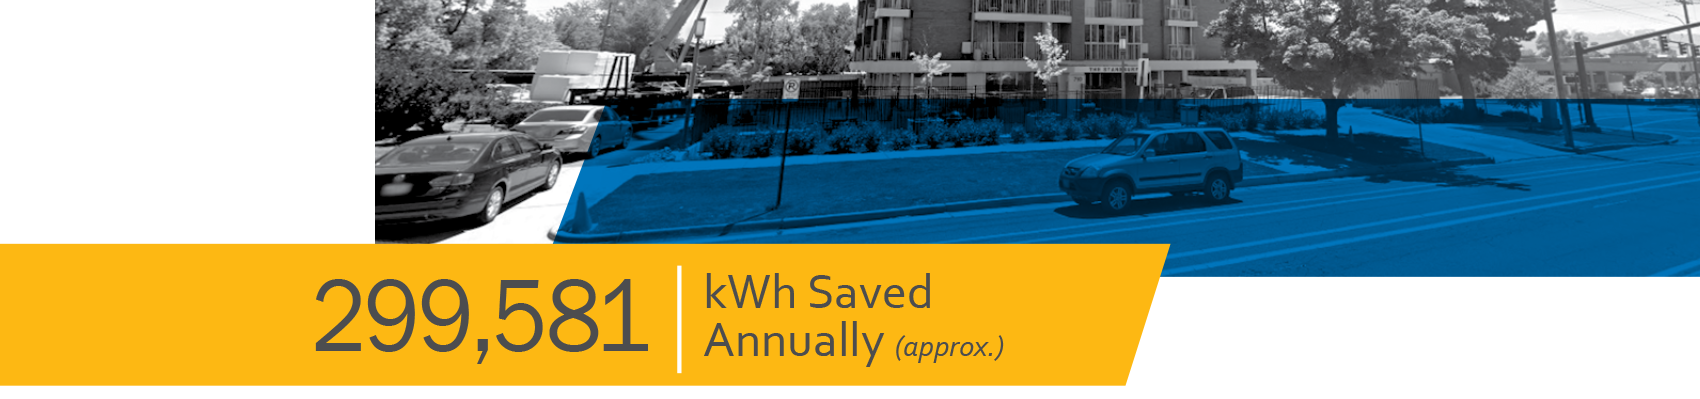 299,581 kWh Saved Annually (approx.)